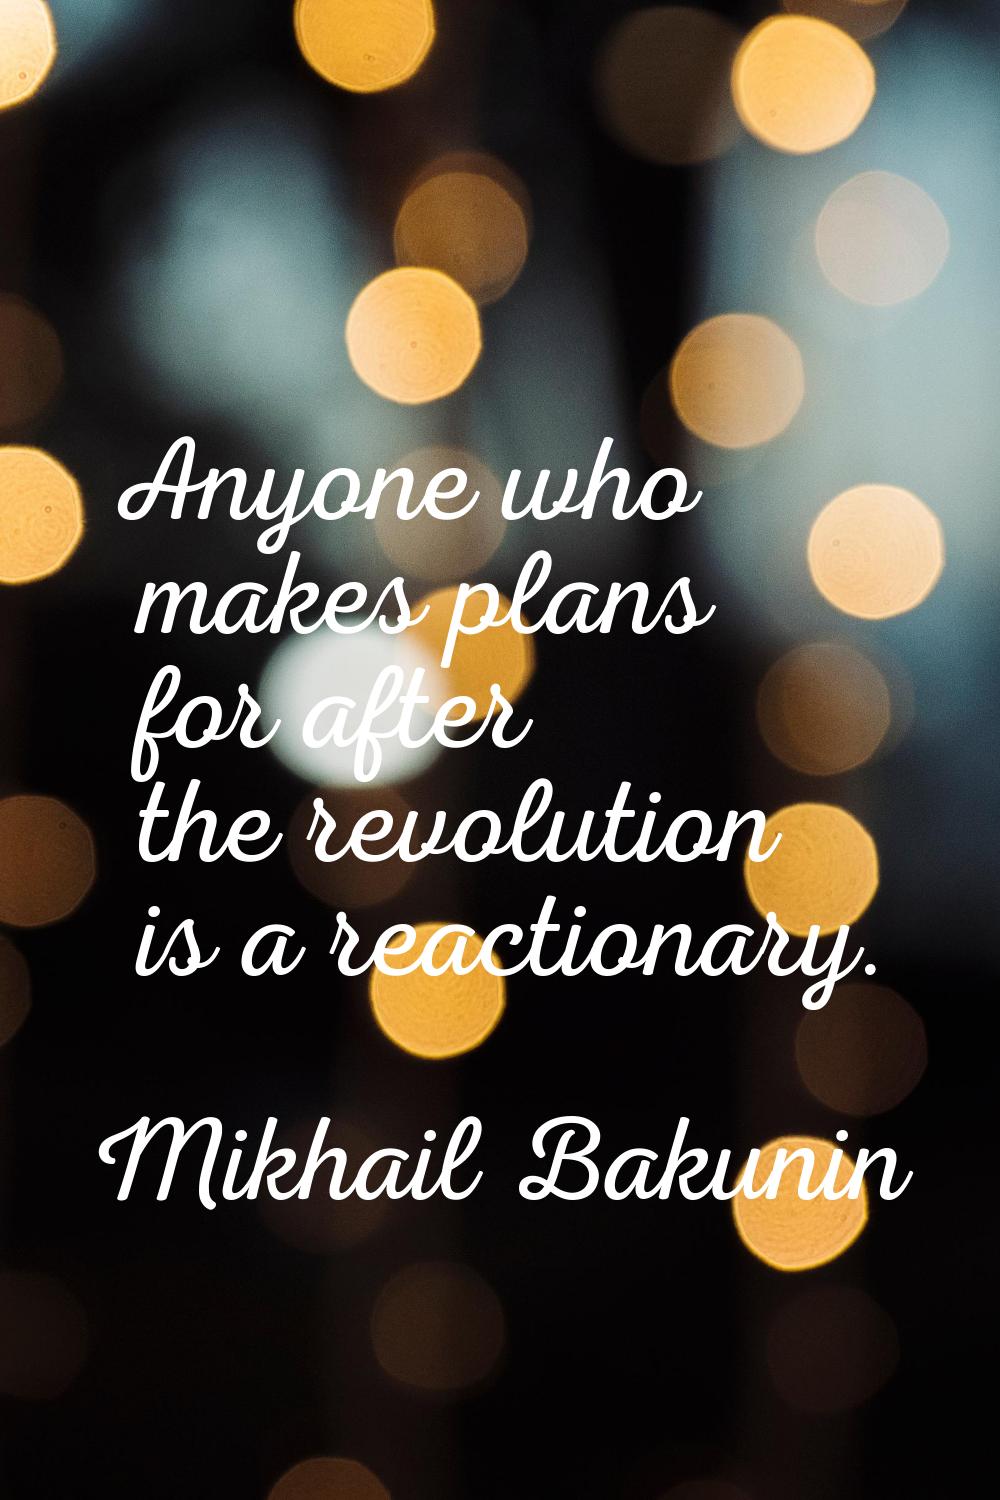 Anyone who makes plans for after the revolution is a reactionary.